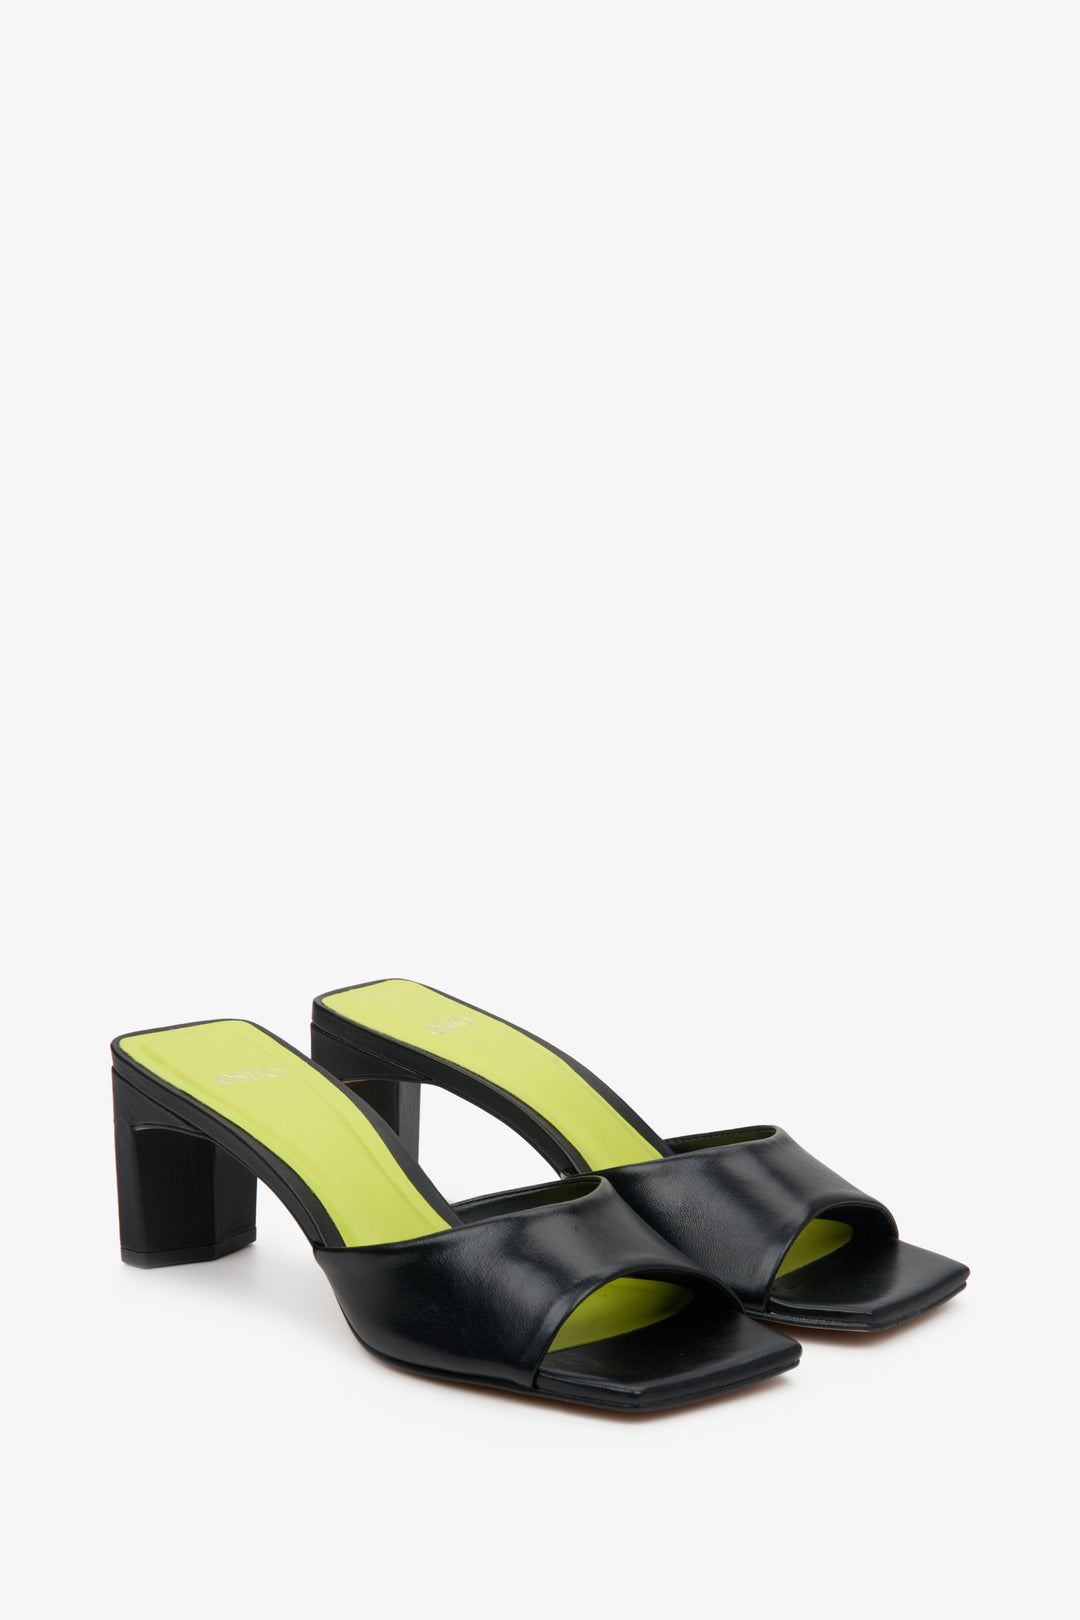 Women's black leather mules with a sturdy block heel by Estro - close-up on the shoe's toe.